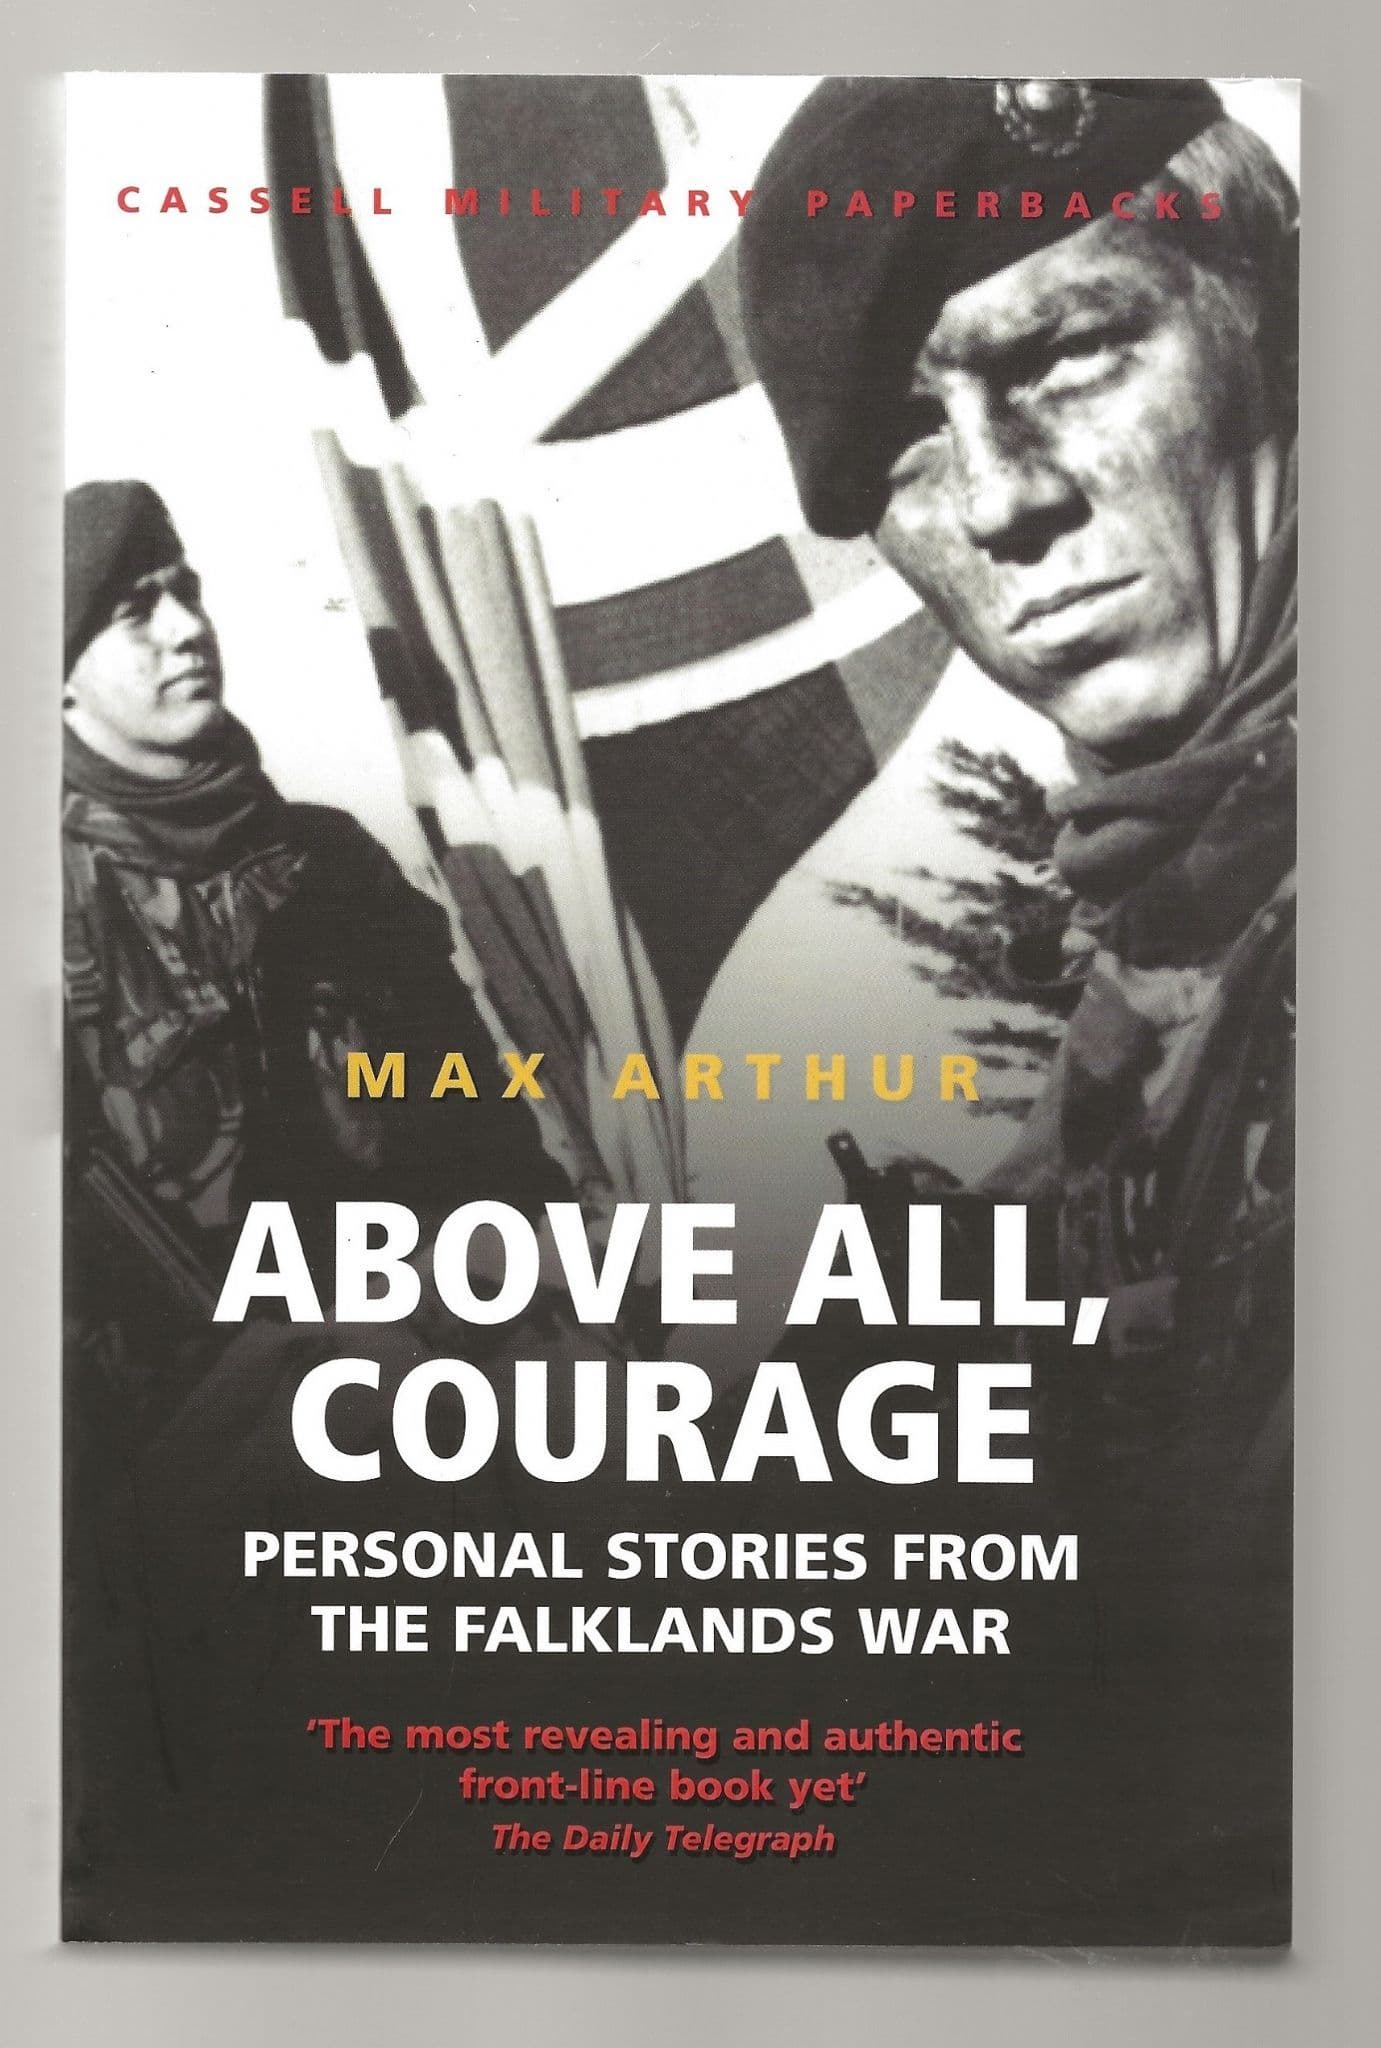 Above All, Courage, Personal Stories from the Falklands War